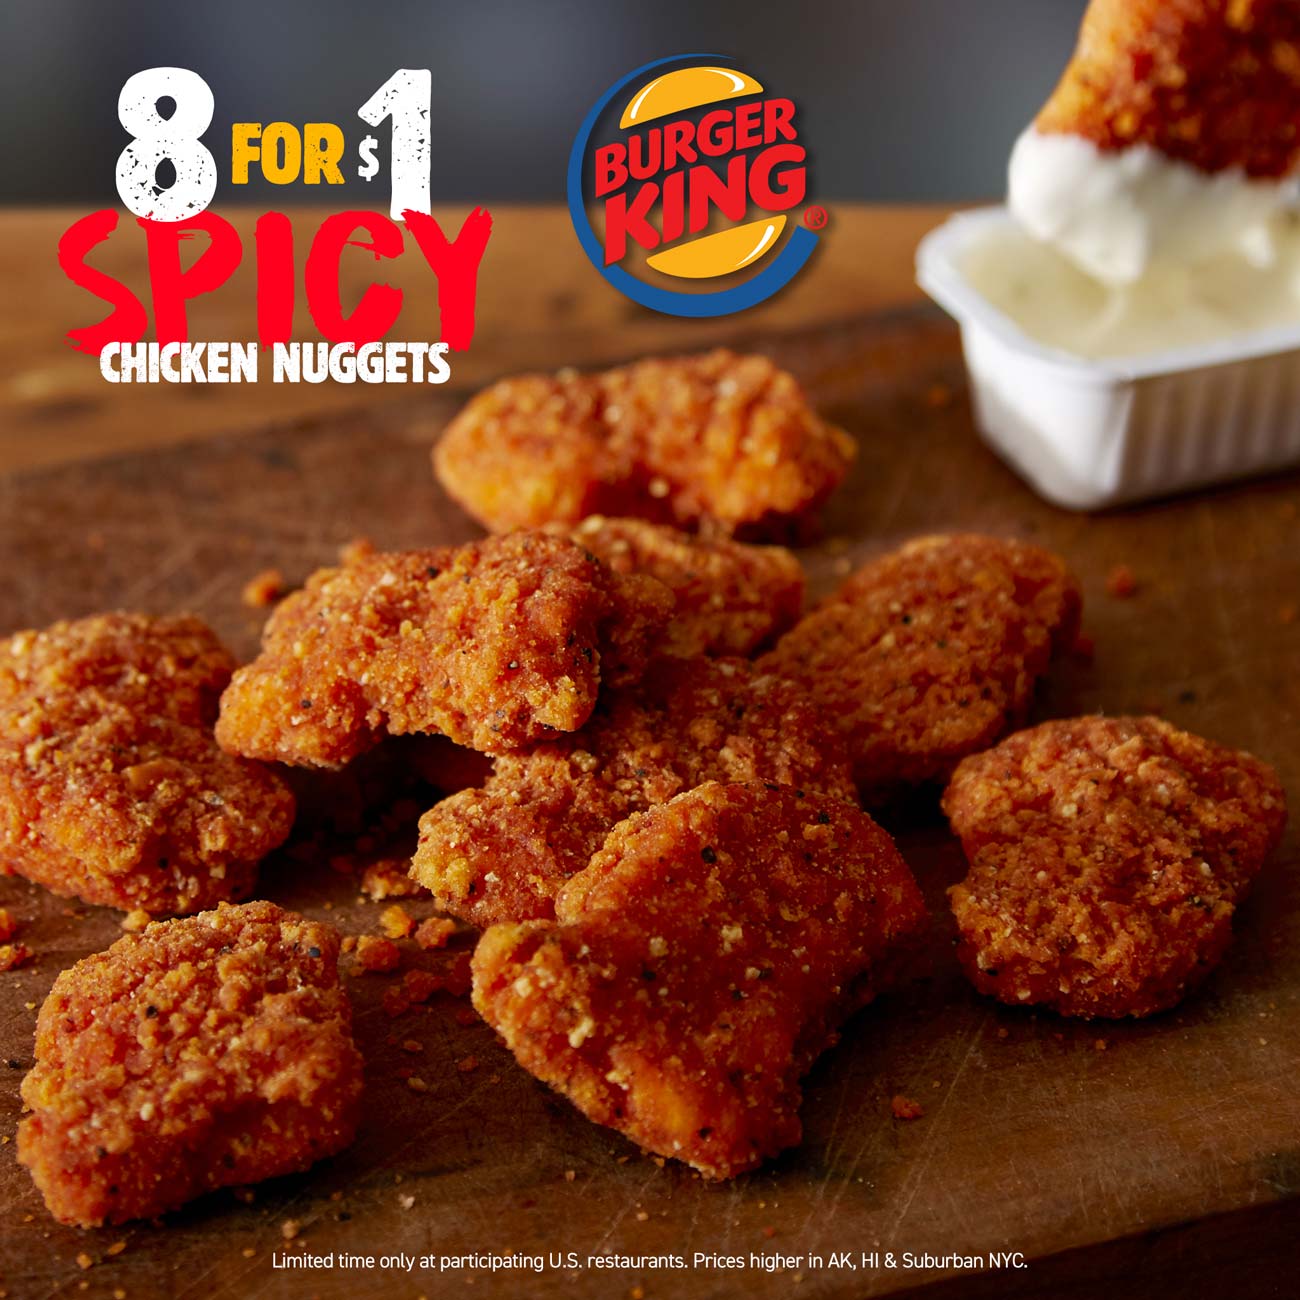 Burger King restaurants Coupon  8pc spicy chicken nuggets for $1 at Burger King #burgerking